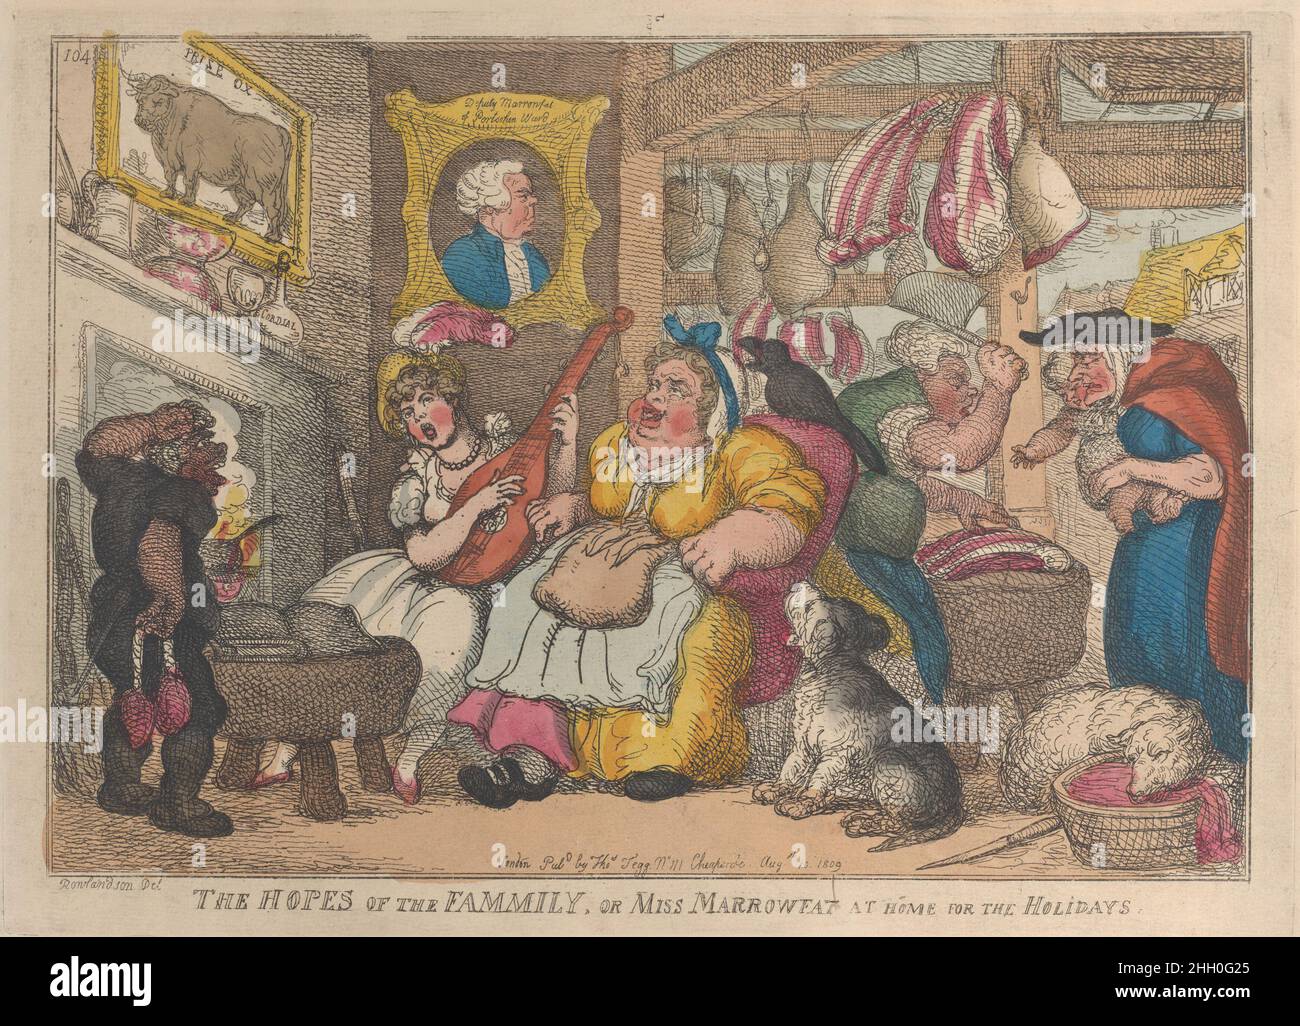 The Hopes of the Family, or Miss Marrowfat at Home for the Holidays August 10, 1809 Thomas Rowlandson Mrs. Marrowfat is seated in an armchair at center, enjoying the music being played next to her. A butcher is behind her at right selling cuts of meat.. The Hopes of the Family, or Miss Marrowfat at Home for the Holidays. Thomas Rowlandson (British, London 1757–1827 London). August 10, 1809. Hand-colored etching. Thomas Tegg (British, 1776–1846). Prints Stock Photo